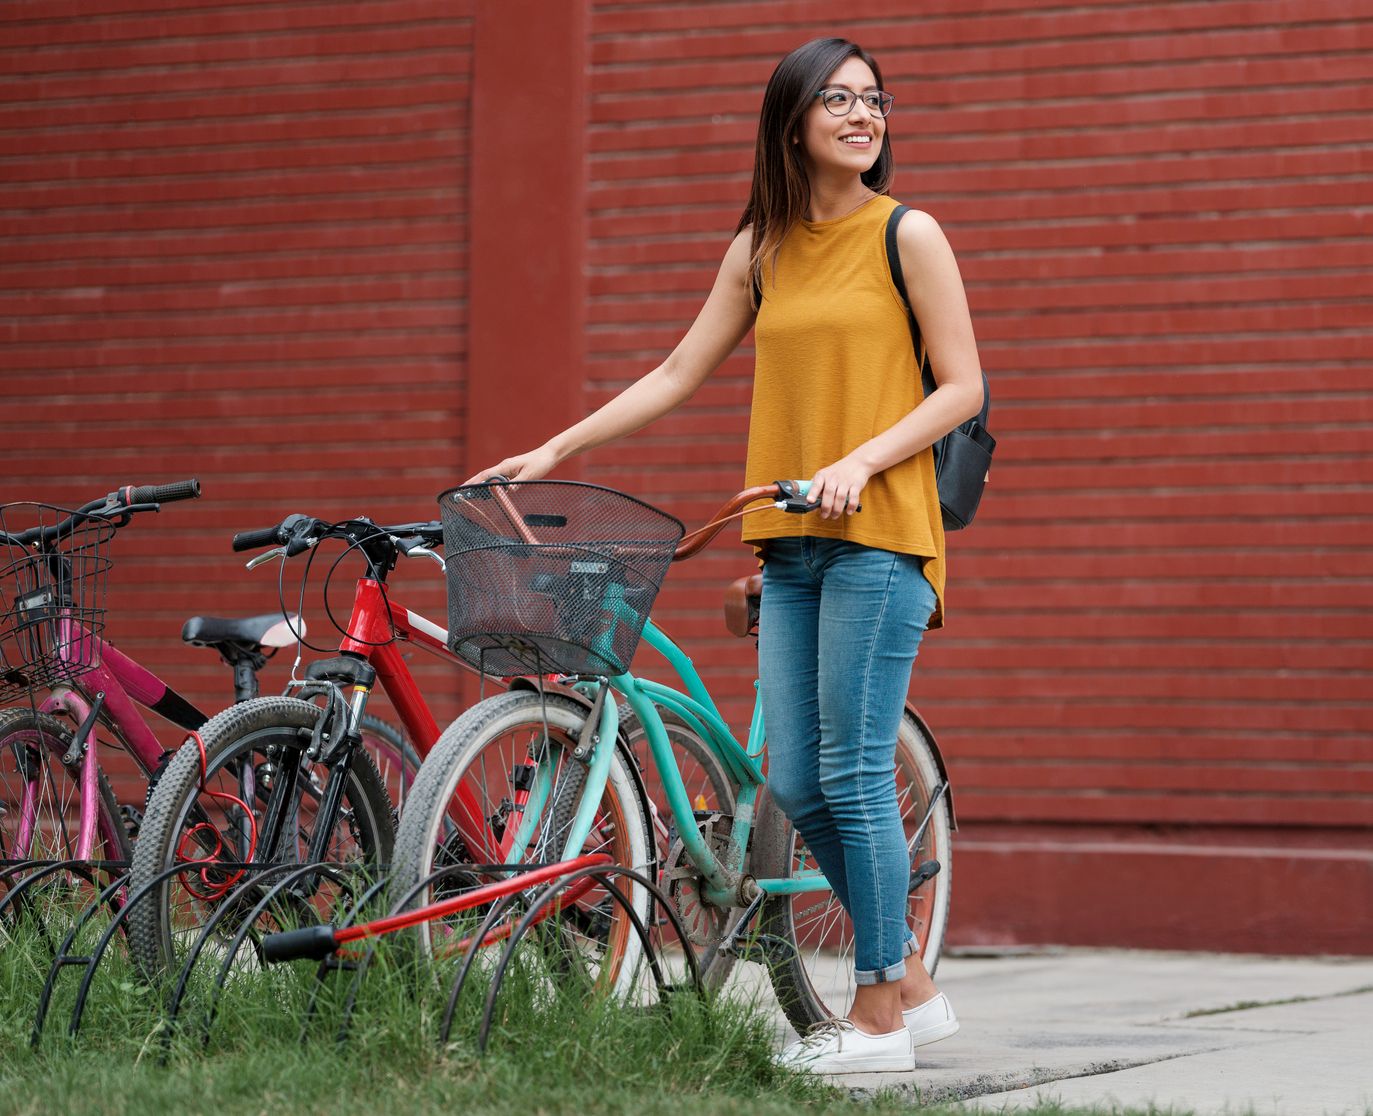 Student,Campus, Bike, on the go, Young women, Latin, Millennial,